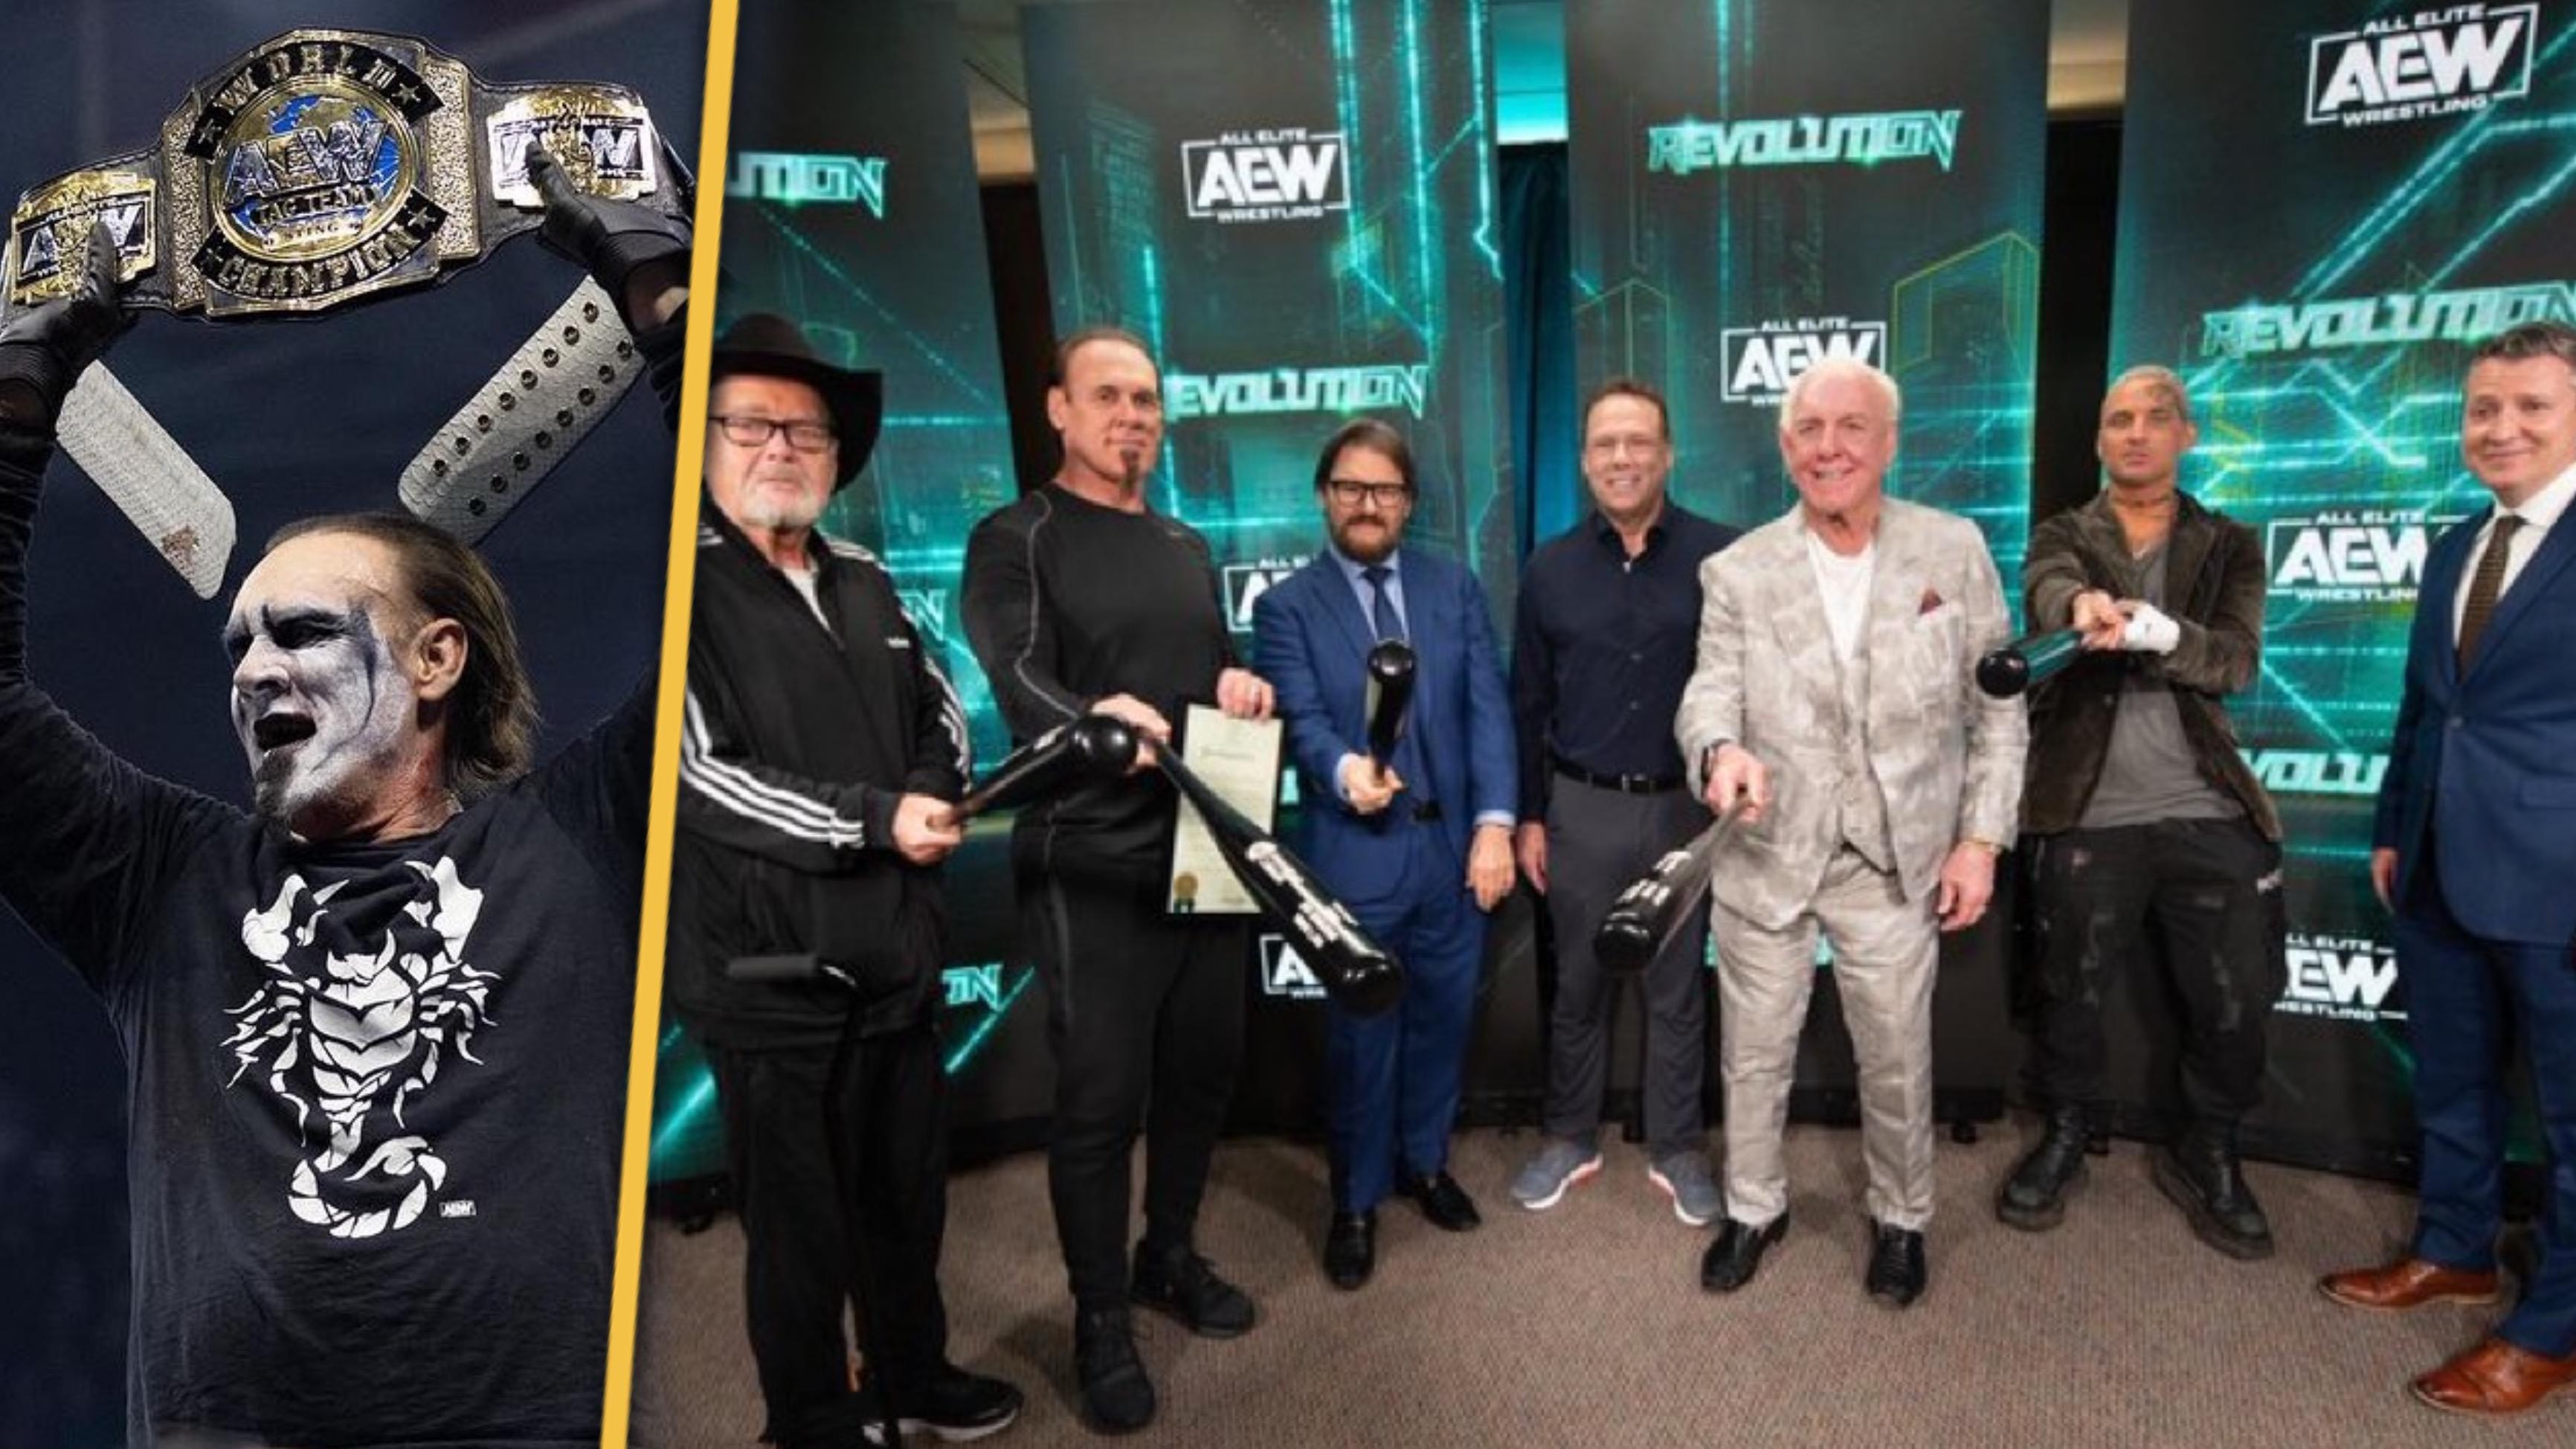 City of Greensboro Presents Former AEW Star Sting With a Heartfelt Gesture